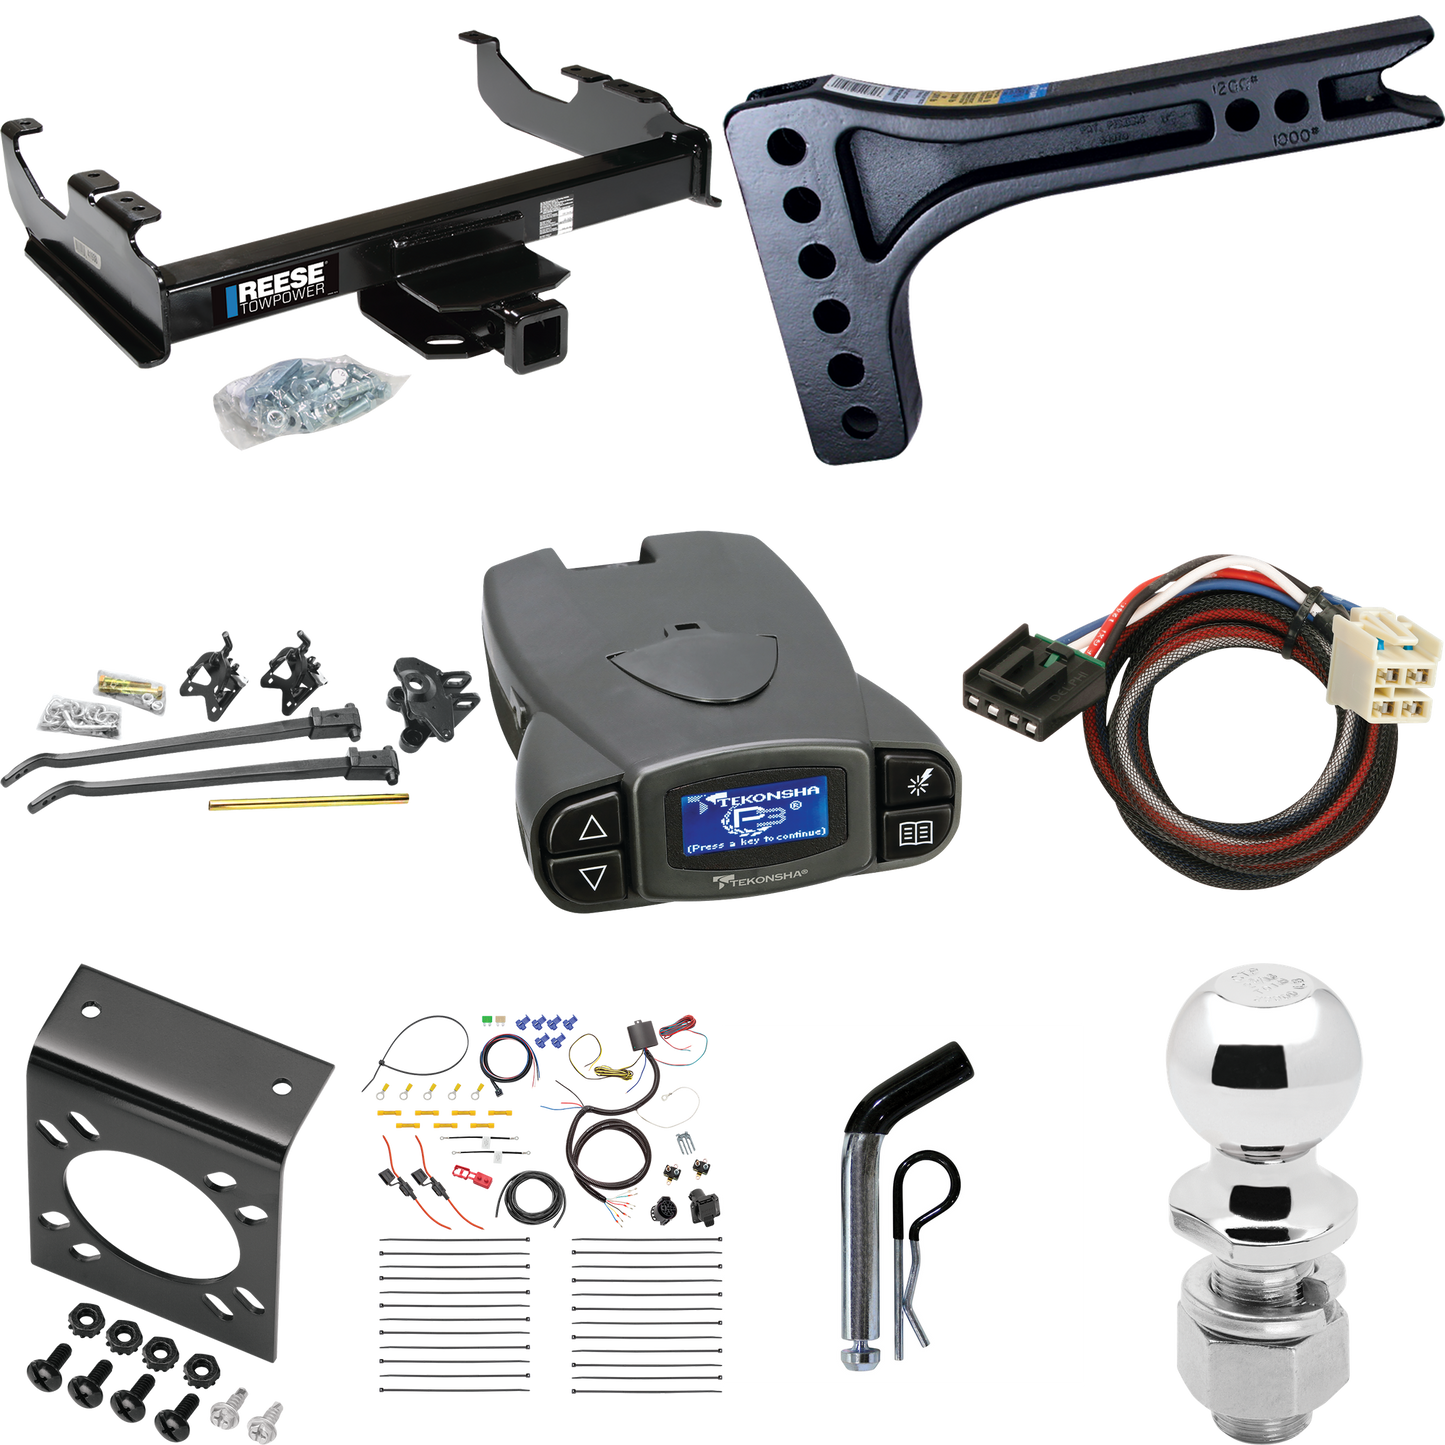 Fits 2015-2019 GMC Sierra 3500 HD Trailer Hitch Tow PKG w/ 15K Trunnion Bar Weight Distribution Hitch + Pin/Clip + 2-5/16" Ball + Tekonsha Prodigy P3 Brake Control + Plug & Play BC Adapter + 7-Way RV Wiring (For Cab & Chassis, w/34" Wide Frames Model